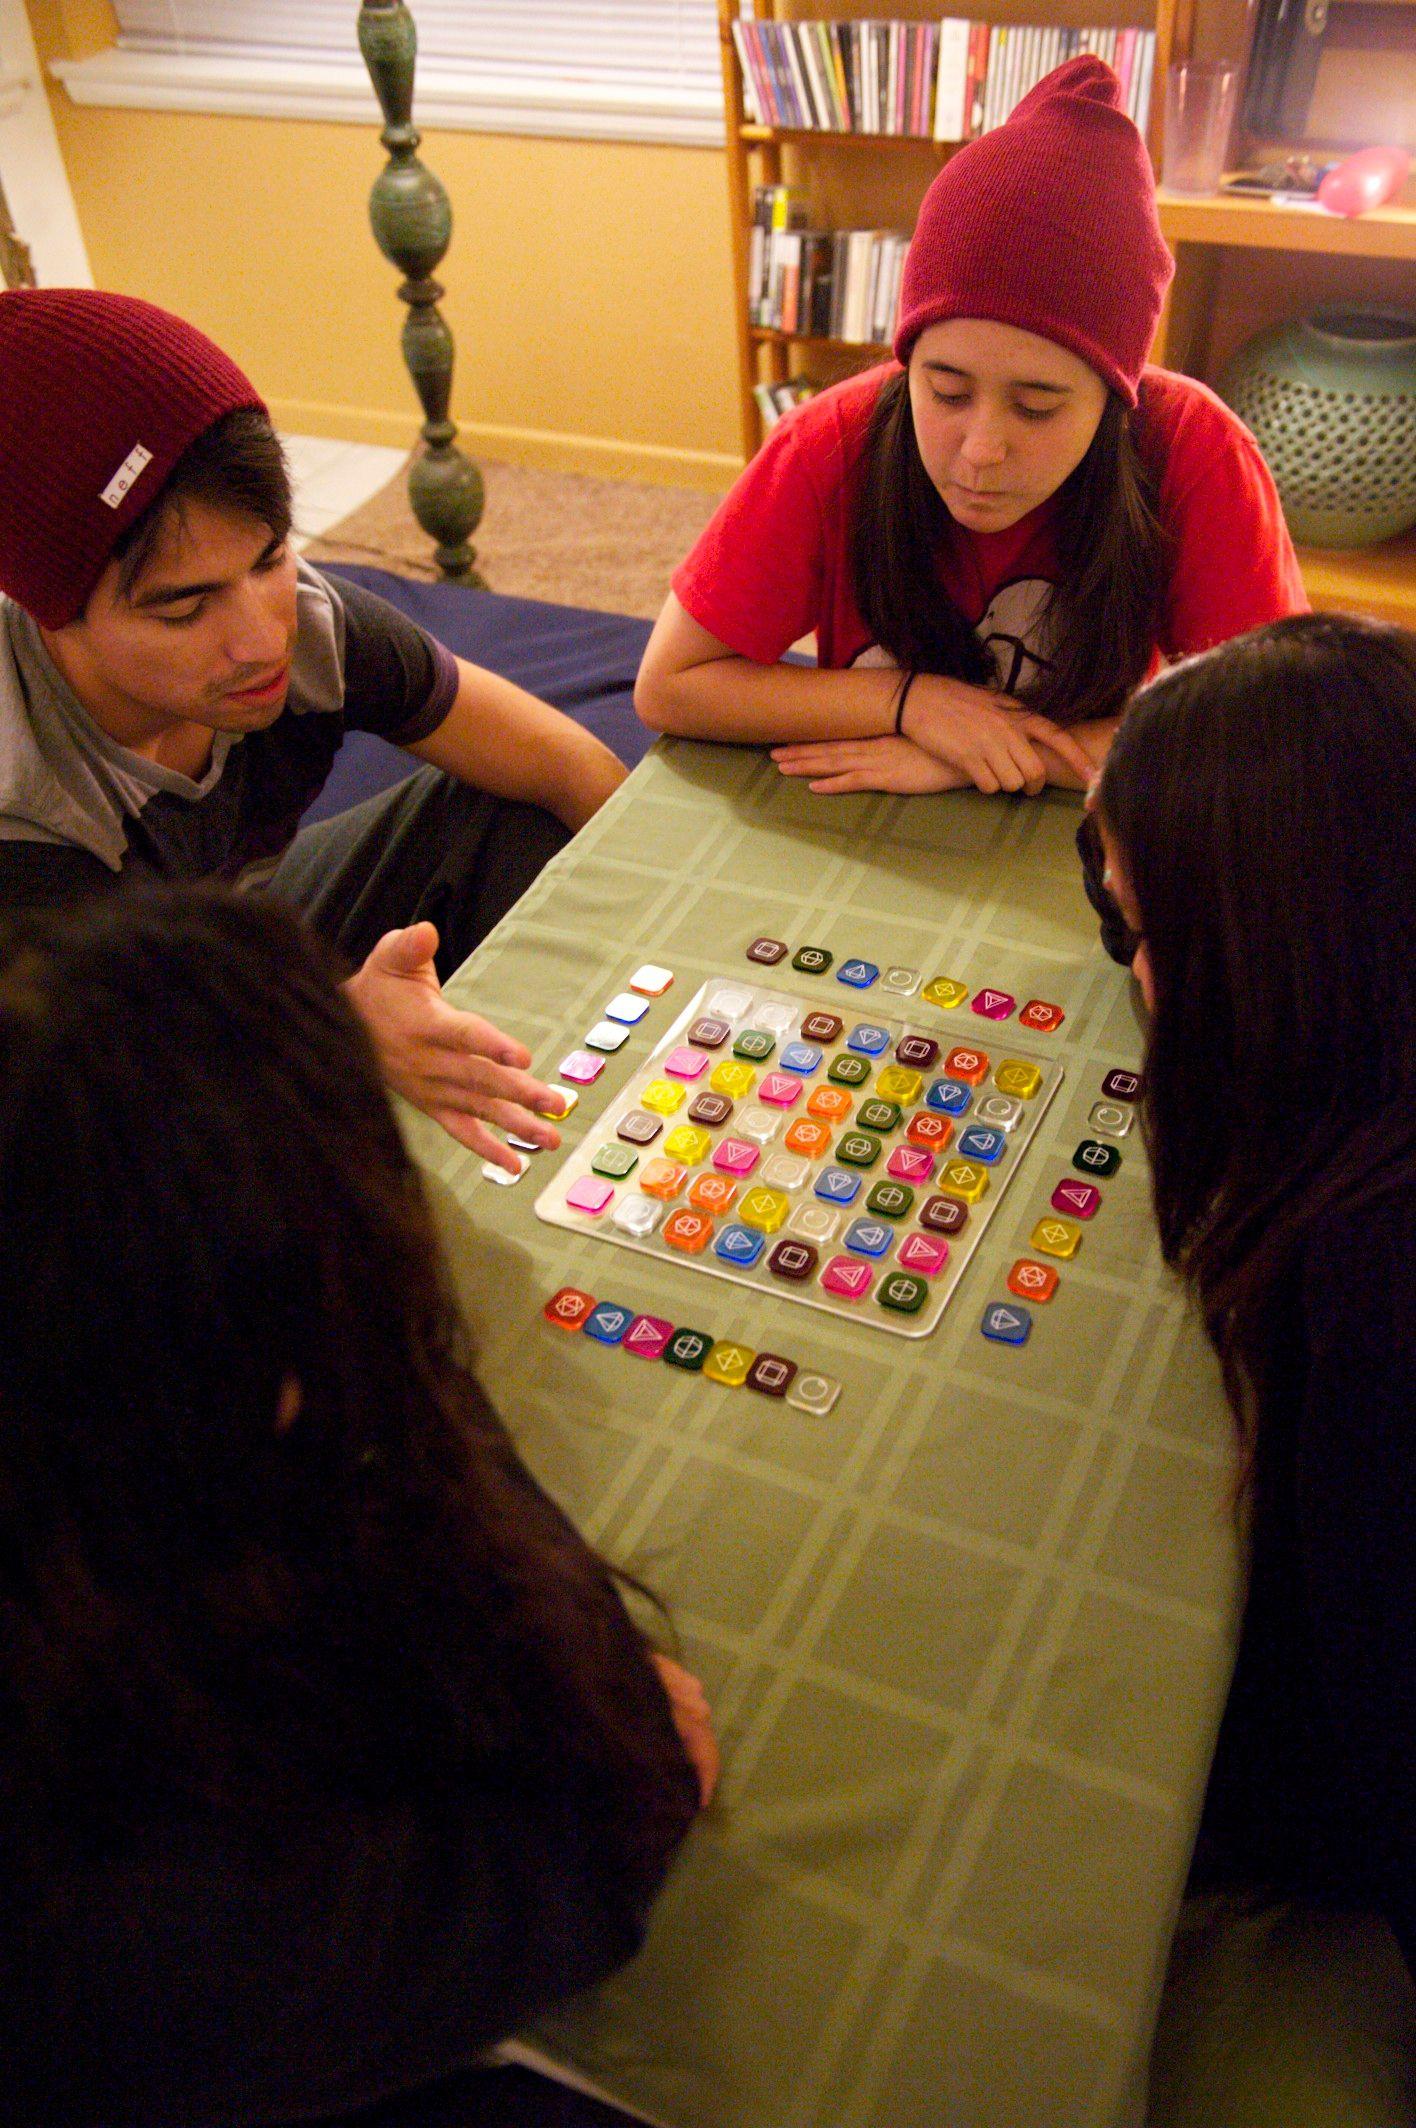 There are four people at a table with a clear square filled with colorful small square tokens in front of them. One person seems to be talking to the rest of the group.